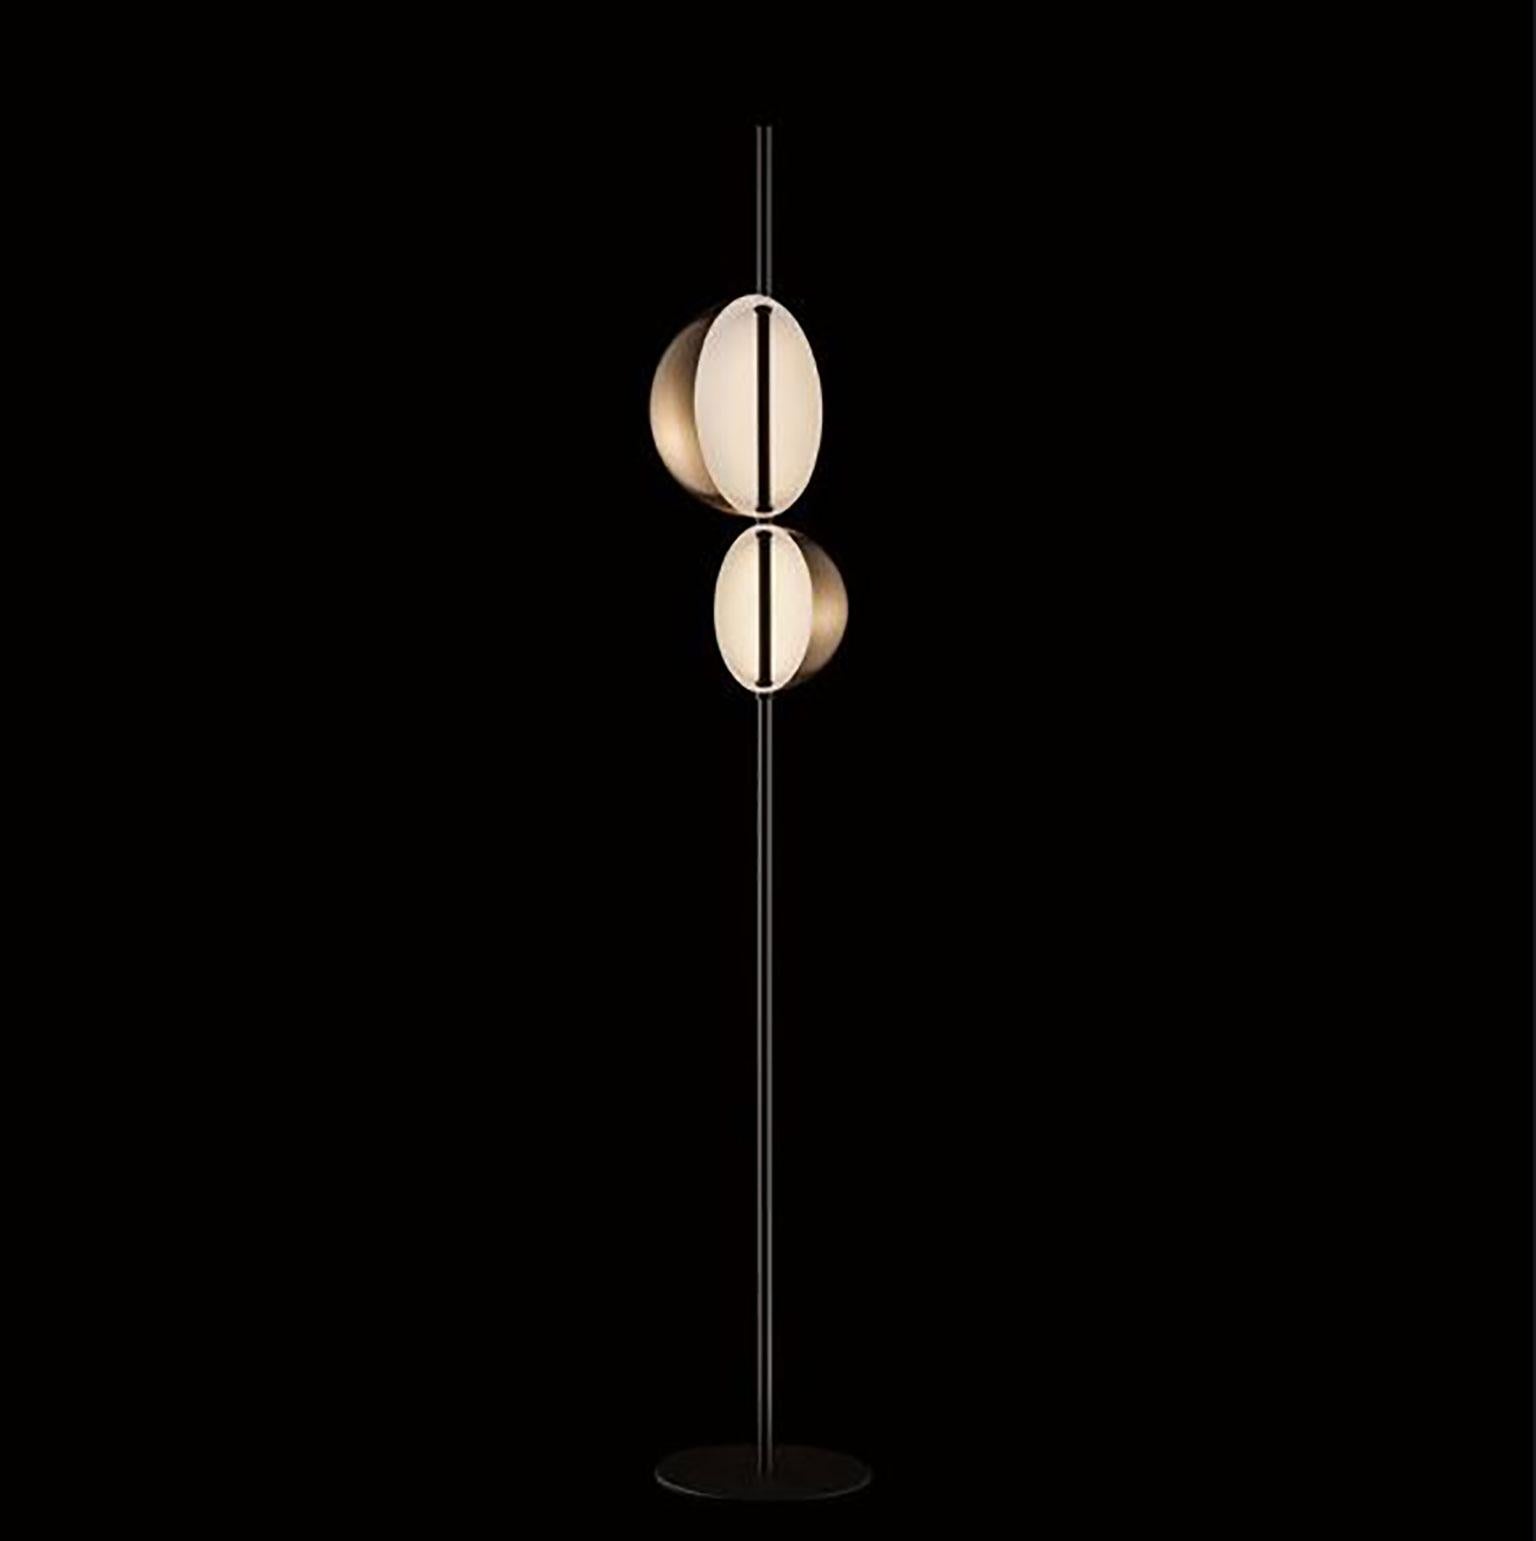 Superluna floor lamp by Victor Vasilev for Oluce. Inspired by Vico Magistretti’s work, Vasilev focused on iconic shapes to improve the potential of the light source. The slender metal rod of the Superluna lamp conceals the electrical components and